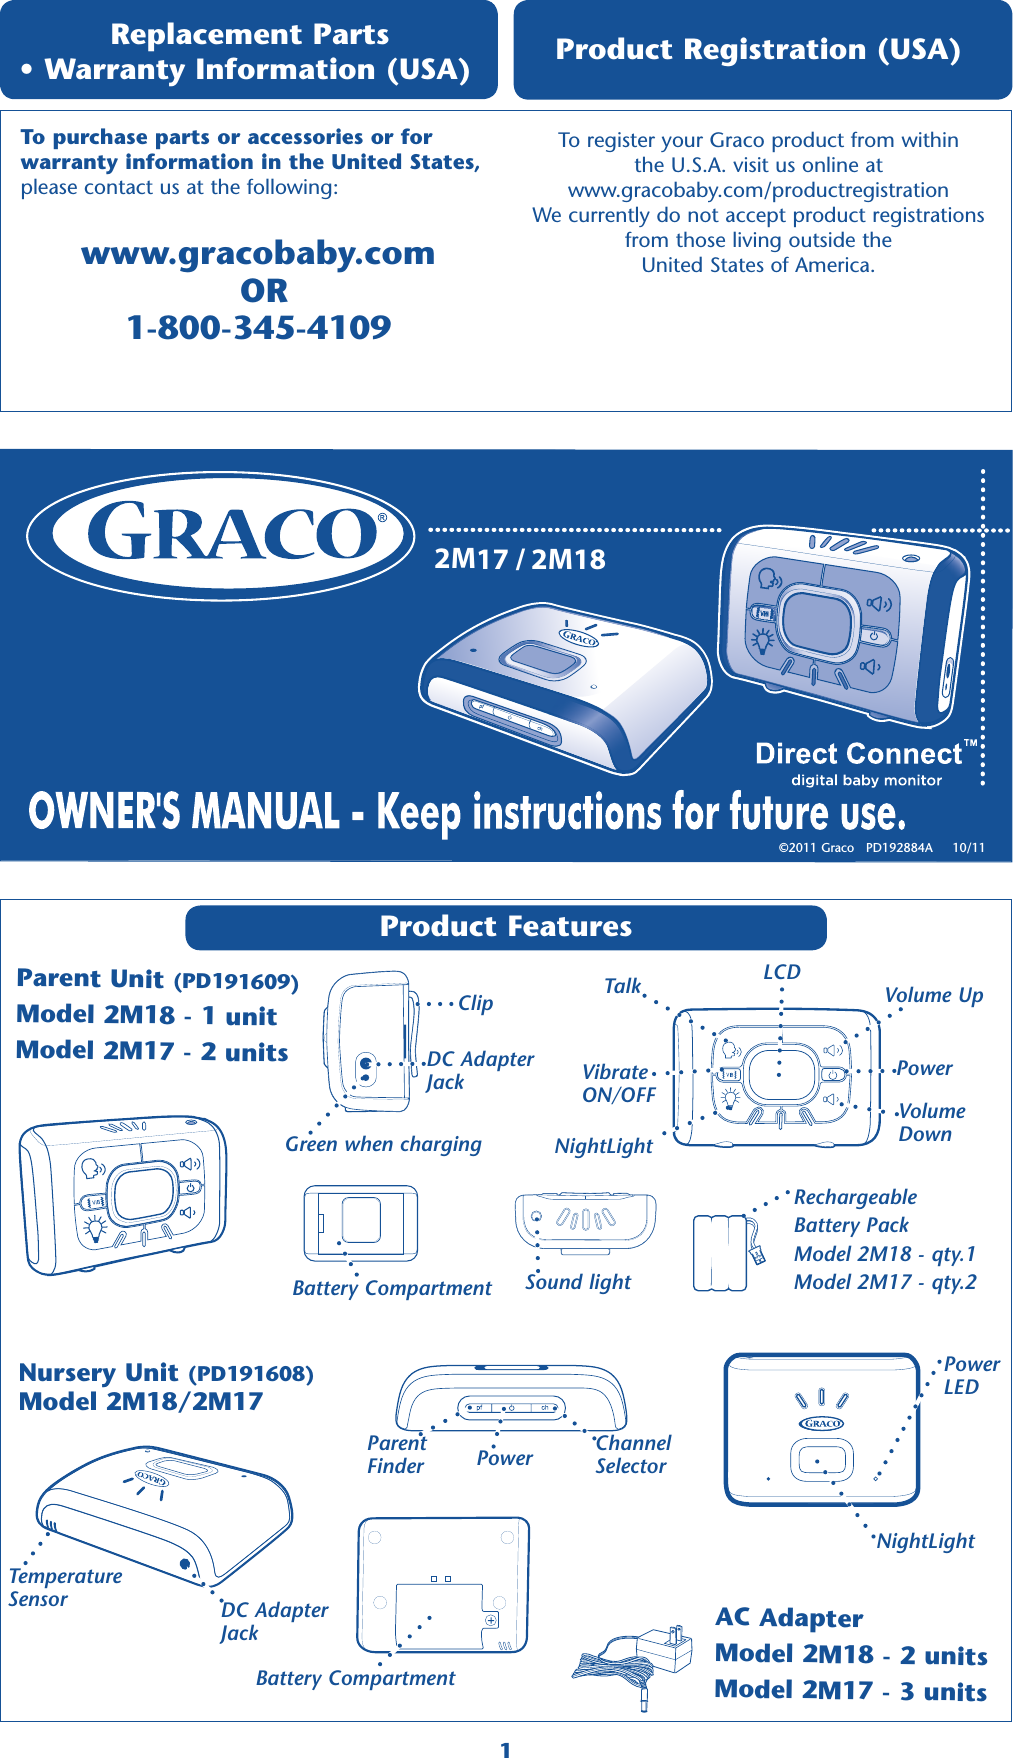 2M17 / 2M18Product Features Parent Unit (PD191609)Model 2M18 - 1 unitModel 2M17 - 2 units Replacement Parts  • Warranty Information (USA) www.gracobaby.com   OR 1-800-345-4109To register your Graco product from within  the U.S.A. visit us online at  www.gracobaby.com/productregistration  We currently do not accept product registrations  from those living outside the  United States of America. Product Registration (USA) To purchase parts or accessories or for  warranty information in the United States, please contact us at the following:©2011 Graco   PD192884A     10/11 Nursery Unit (PD191608)Model 2M18/2M17ClipDC Adapter  JackGreen when chargingSound lightBattery Compartment1LCDVolume Up Volume  Down Power TalkNightLightVibrate ON/OFFAC AdapterModel 2M18 - 2 unitsModel 2M17 - 3 unitsDC Adapter  JackBattery CompartmentPower Parent FinderChannel SelectorNightLightRechargeableBattery PackModel 2M18 - qty.1 Model 2M17 - qty.2 Temperature SensorPower  LED